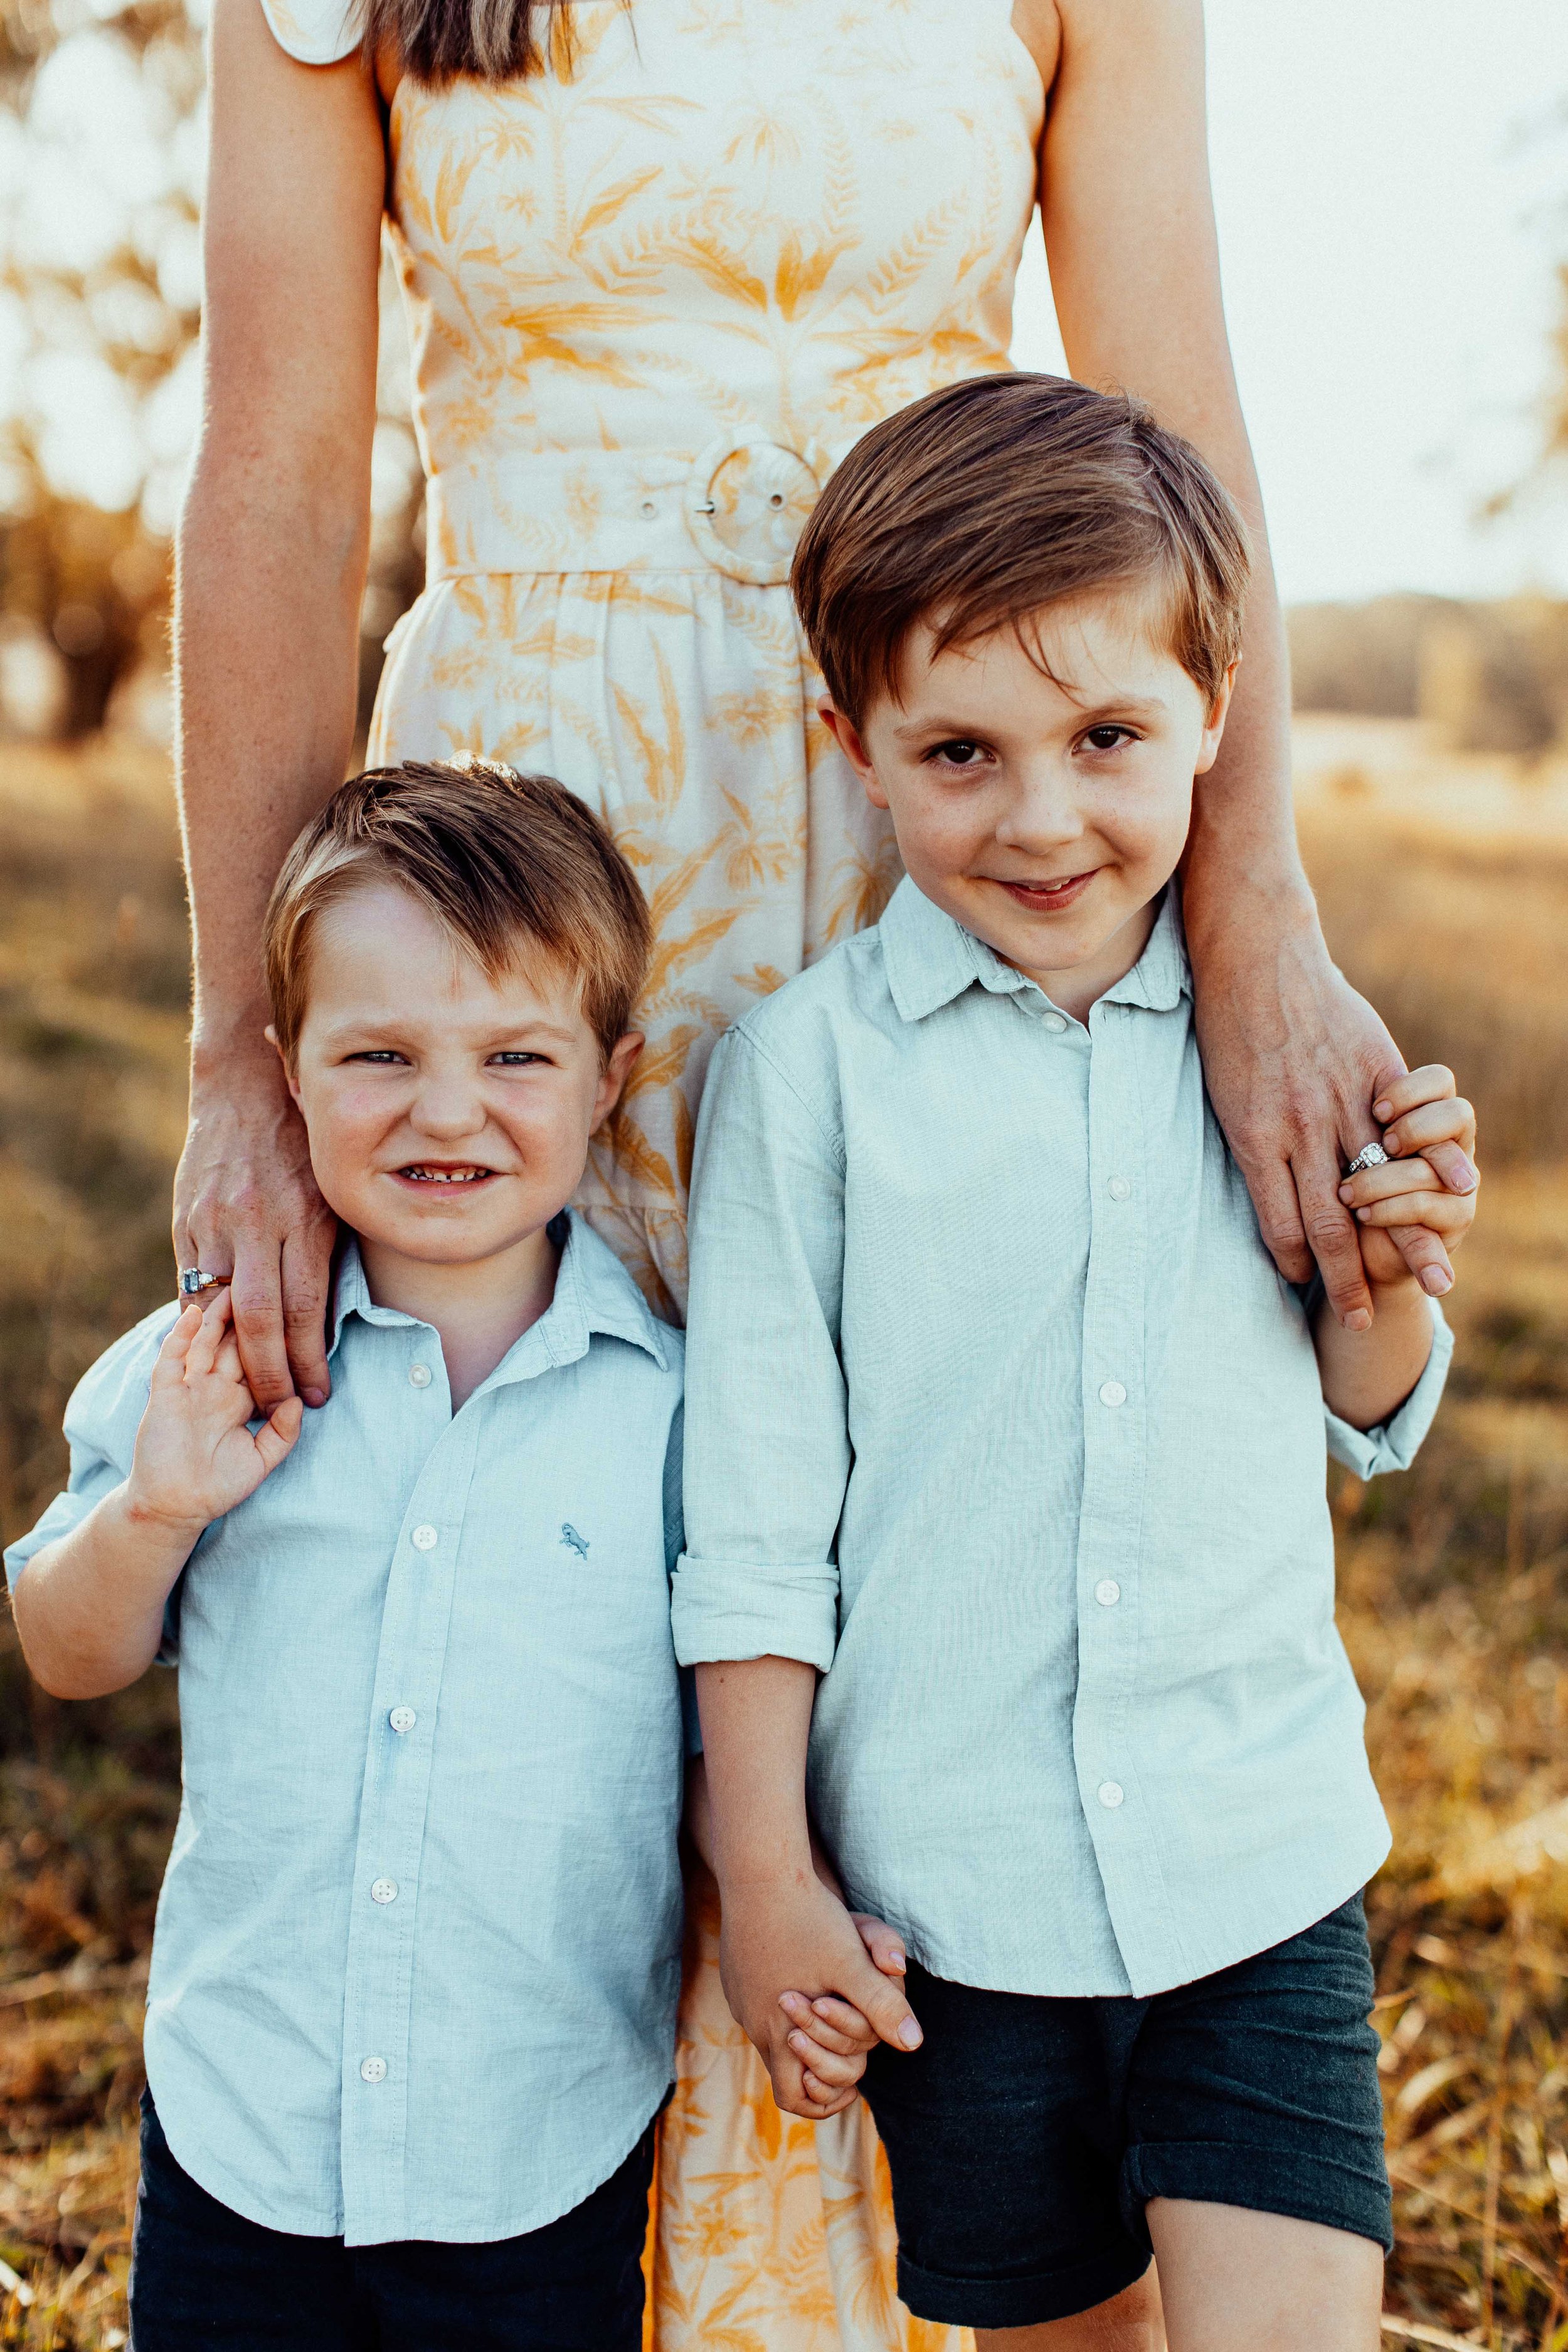 durney-family-exeter-southern-highlands-bowral-inhome-family-lifestyle-wollondilly-camden-macarthur-sydney-photography-www.emilyobrienphotography.net-2.jpg